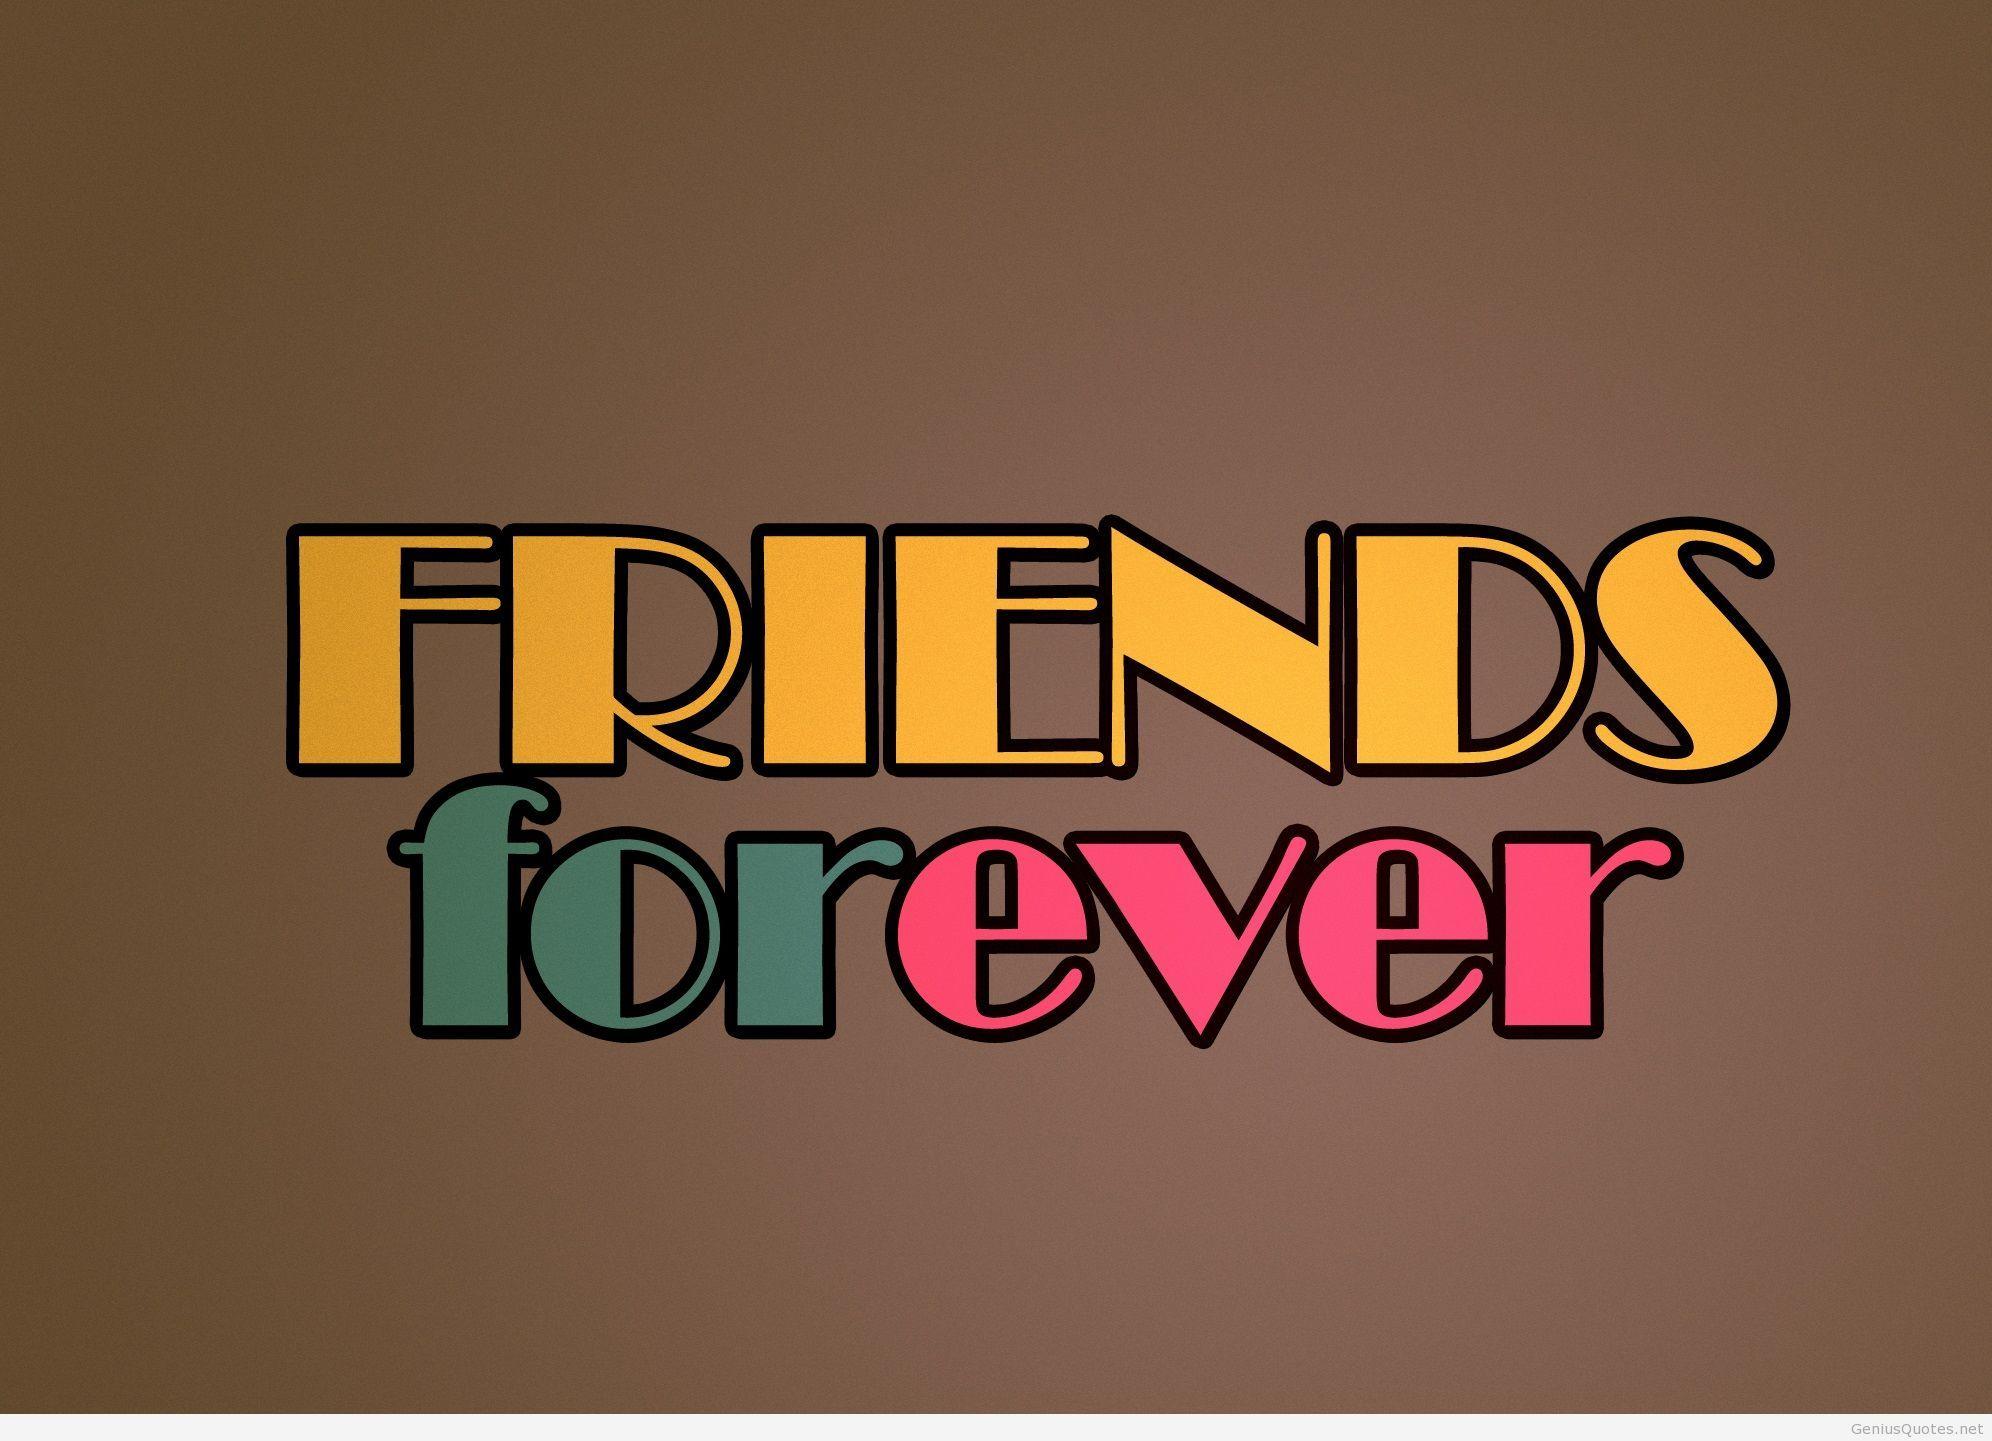 Best friends forever quotes image and friends wallpaper